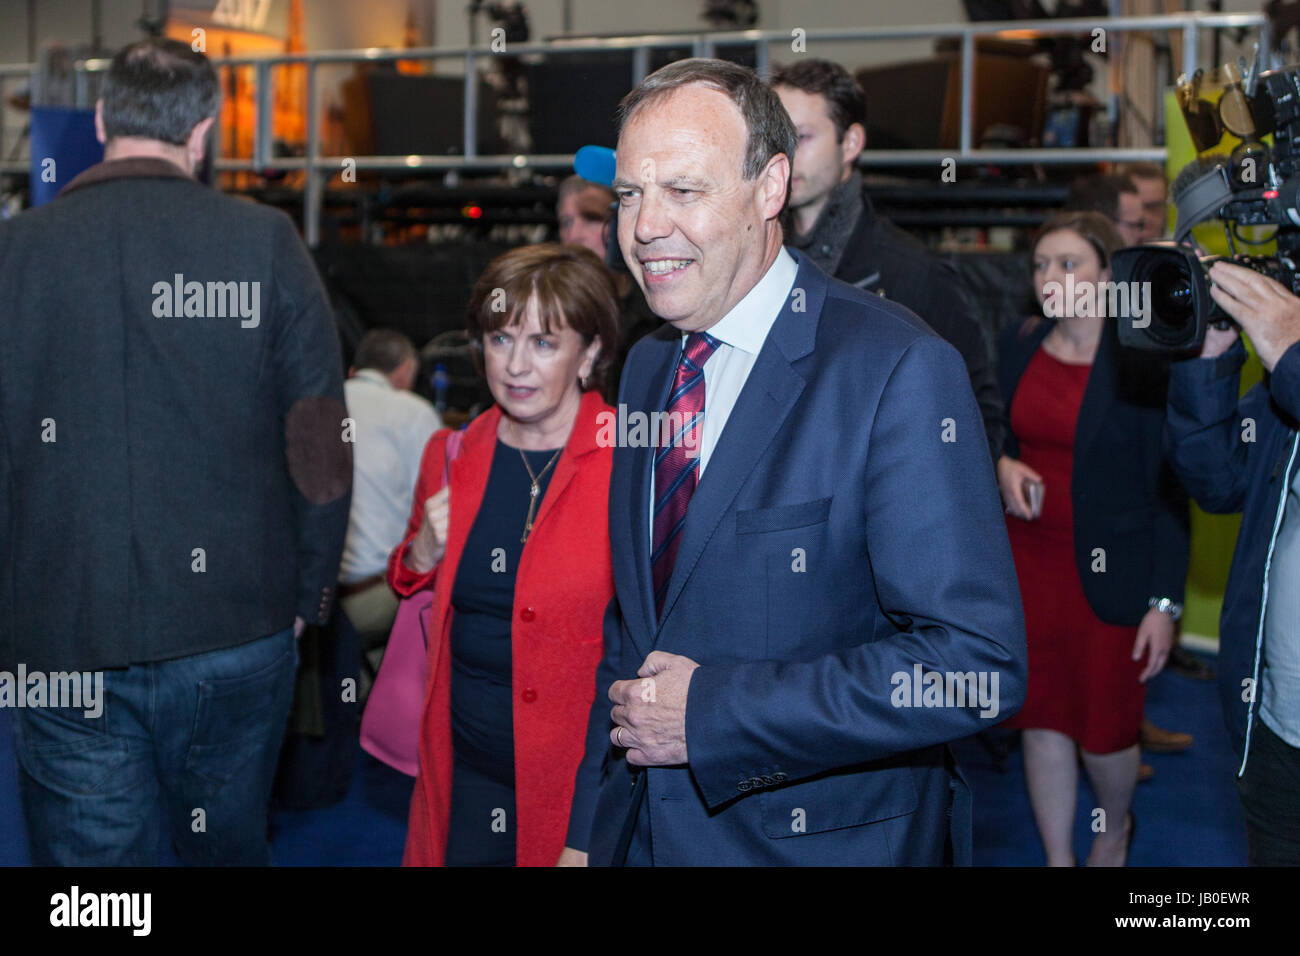 Belfast, Northern Ireland. 8th June 2017. Counting for the Belfast Area in the 2017 UK General Election got under way at the Titanic Exhibition Centre. Nigel and Diane Dodds Arrive at the Count centre in Belfast, Mr Dodds is hoping to hold the Seat of Belfast North Credit: Bonzo/Alamy Live News Stock Photo